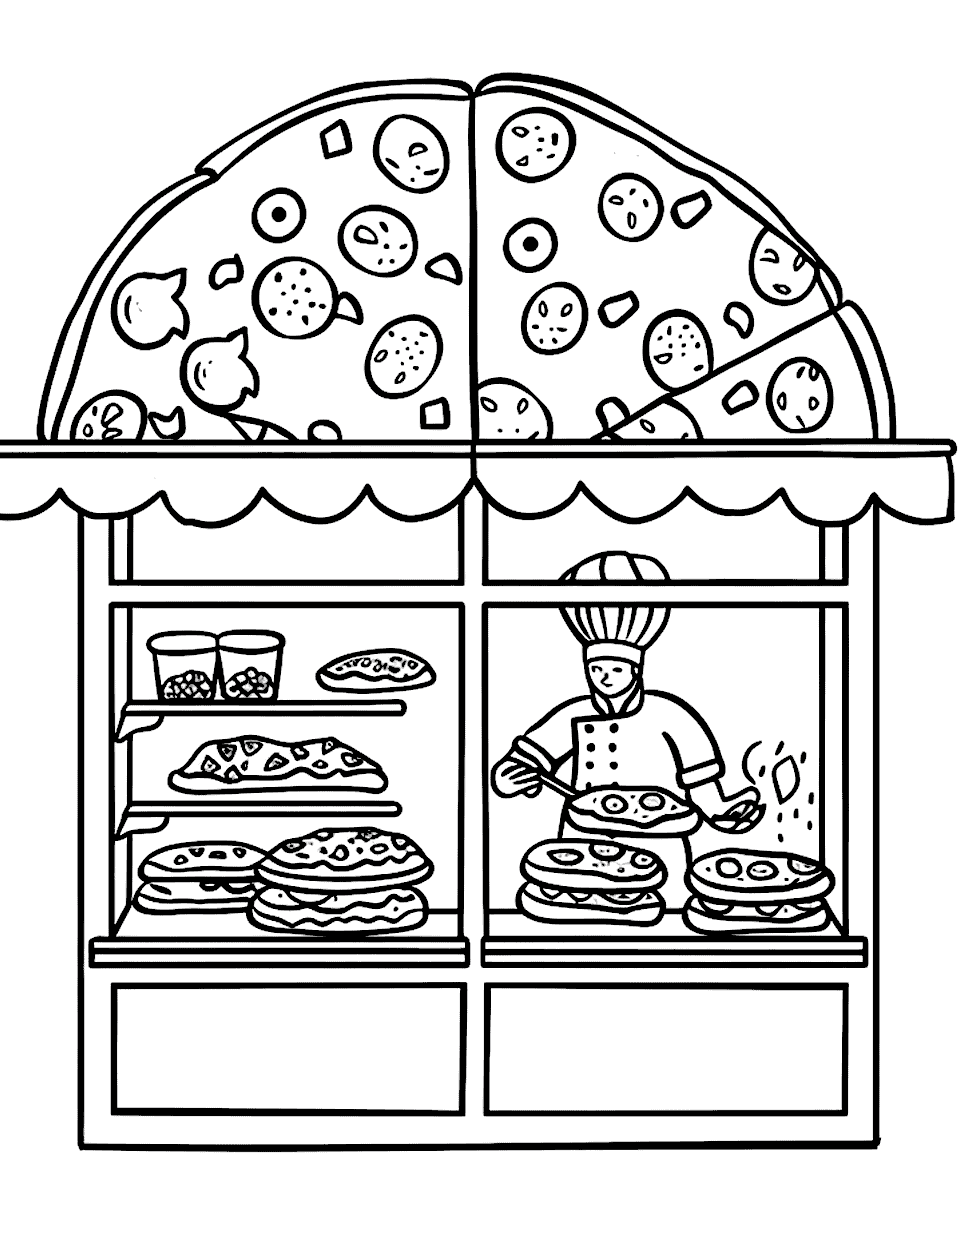 Pizza Shop Daydream Coloring Page - A small pizza shop front with a chef making pizza in the window.